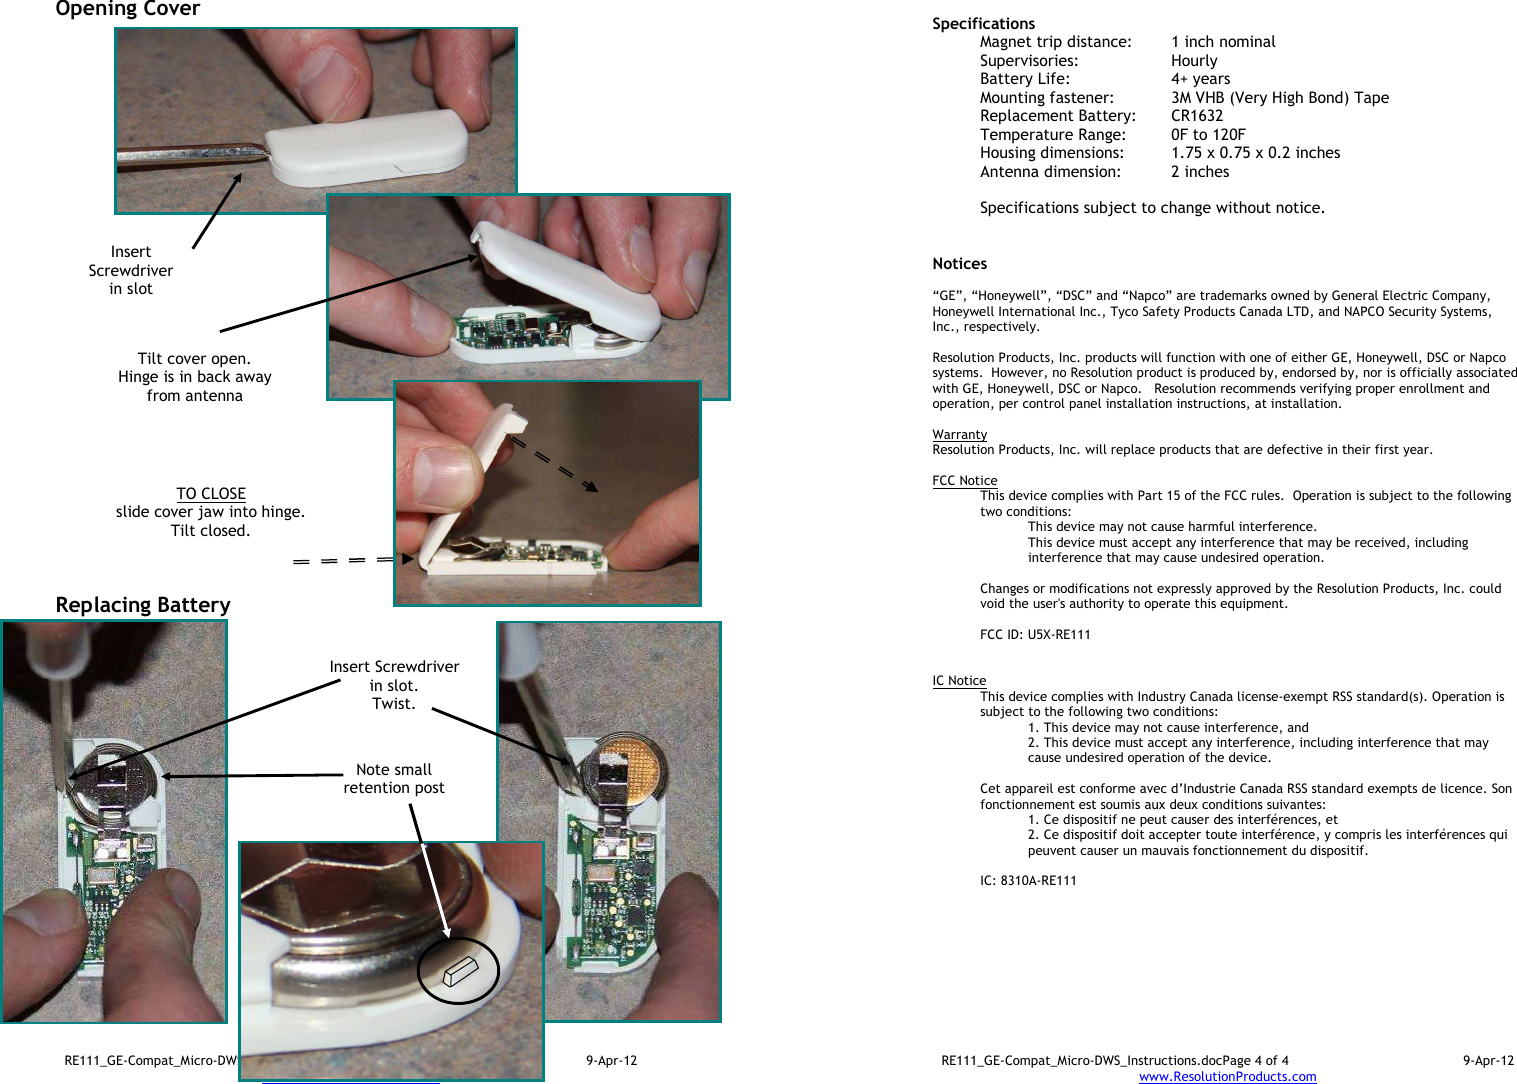 RE111_GE-Compat_Micro-DWS_Instructions.docPage 3 of 4  9-Apr-12 www.ResolutionProducts.com  Opening Cover                                Replacing Battery                     TO CLOSE slide cover jaw into hinge. Tilt closed.  Insert Screwdriver in slot  Tilt cover open. Hinge is in back away from antenna  Insert Screwdriver in slot. Twist.  Note small retention post  RE111_GE-Compat_Micro-DWS_Instructions.docPage 4 of 4  9-Apr-12 www.ResolutionProducts.com   Specifications   Magnet trip distance:  1 inch nominal Supervisories:  Hourly Battery Life:  4+ years Mounting fastener:  3M VHB (Very High Bond) Tape Replacement Battery:  CR1632 Temperature Range:  0F to 120F Housing dimensions:  1.75 x 0.75 x 0.2 inches Antenna dimension:   2 inches  Specifications subject to change without notice.   Notices  “GE”, “Honeywell”, “DSC” and “Napco” are trademarks owned by General Electric Company, Honeywell International Inc., Tyco Safety Products Canada LTD, and NAPCO Security Systems, Inc., respectively.    Resolution Products, Inc. products will function with one of either GE, Honeywell, DSC or Napco systems.  However, no Resolution product is produced by, endorsed by, nor is officially associated with GE, Honeywell, DSC or Napco.   Resolution recommends verifying proper enrollment and operation, per control panel installation instructions, at installation.  Warranty Resolution Products, Inc. will replace products that are defective in their first year.  FCC Notice This device complies with Part 15 of the FCC rules.  Operation is subject to the following two conditions: This device may not cause harmful interference. This device must accept any interference that may be received, including interference that may cause undesired operation.   Changes or modifications not expressly approved by the Resolution Products, Inc. could void the user&apos;s authority to operate this equipment.  FCC ID: U5X-RE111   IC Notice This device complies with Industry Canada license-exempt RSS standard(s). Operation is subject to the following two conditions: 1. This device may not cause interference, and  2. This device must accept any interference, including interference that may cause undesired operation of the device.   Cet appareil est conforme avec d’Industrie Canada RSS standard exempts de licence. Son fonctionnement est soumis aux deux conditions suivantes: 1. Ce dispositif ne peut causer des interférences, et 2. Ce dispositif doit accepter toute interférence, y compris les interférences qui peuvent causer un mauvais fonctionnement du dispositif.   IC: 8310A-RE111     